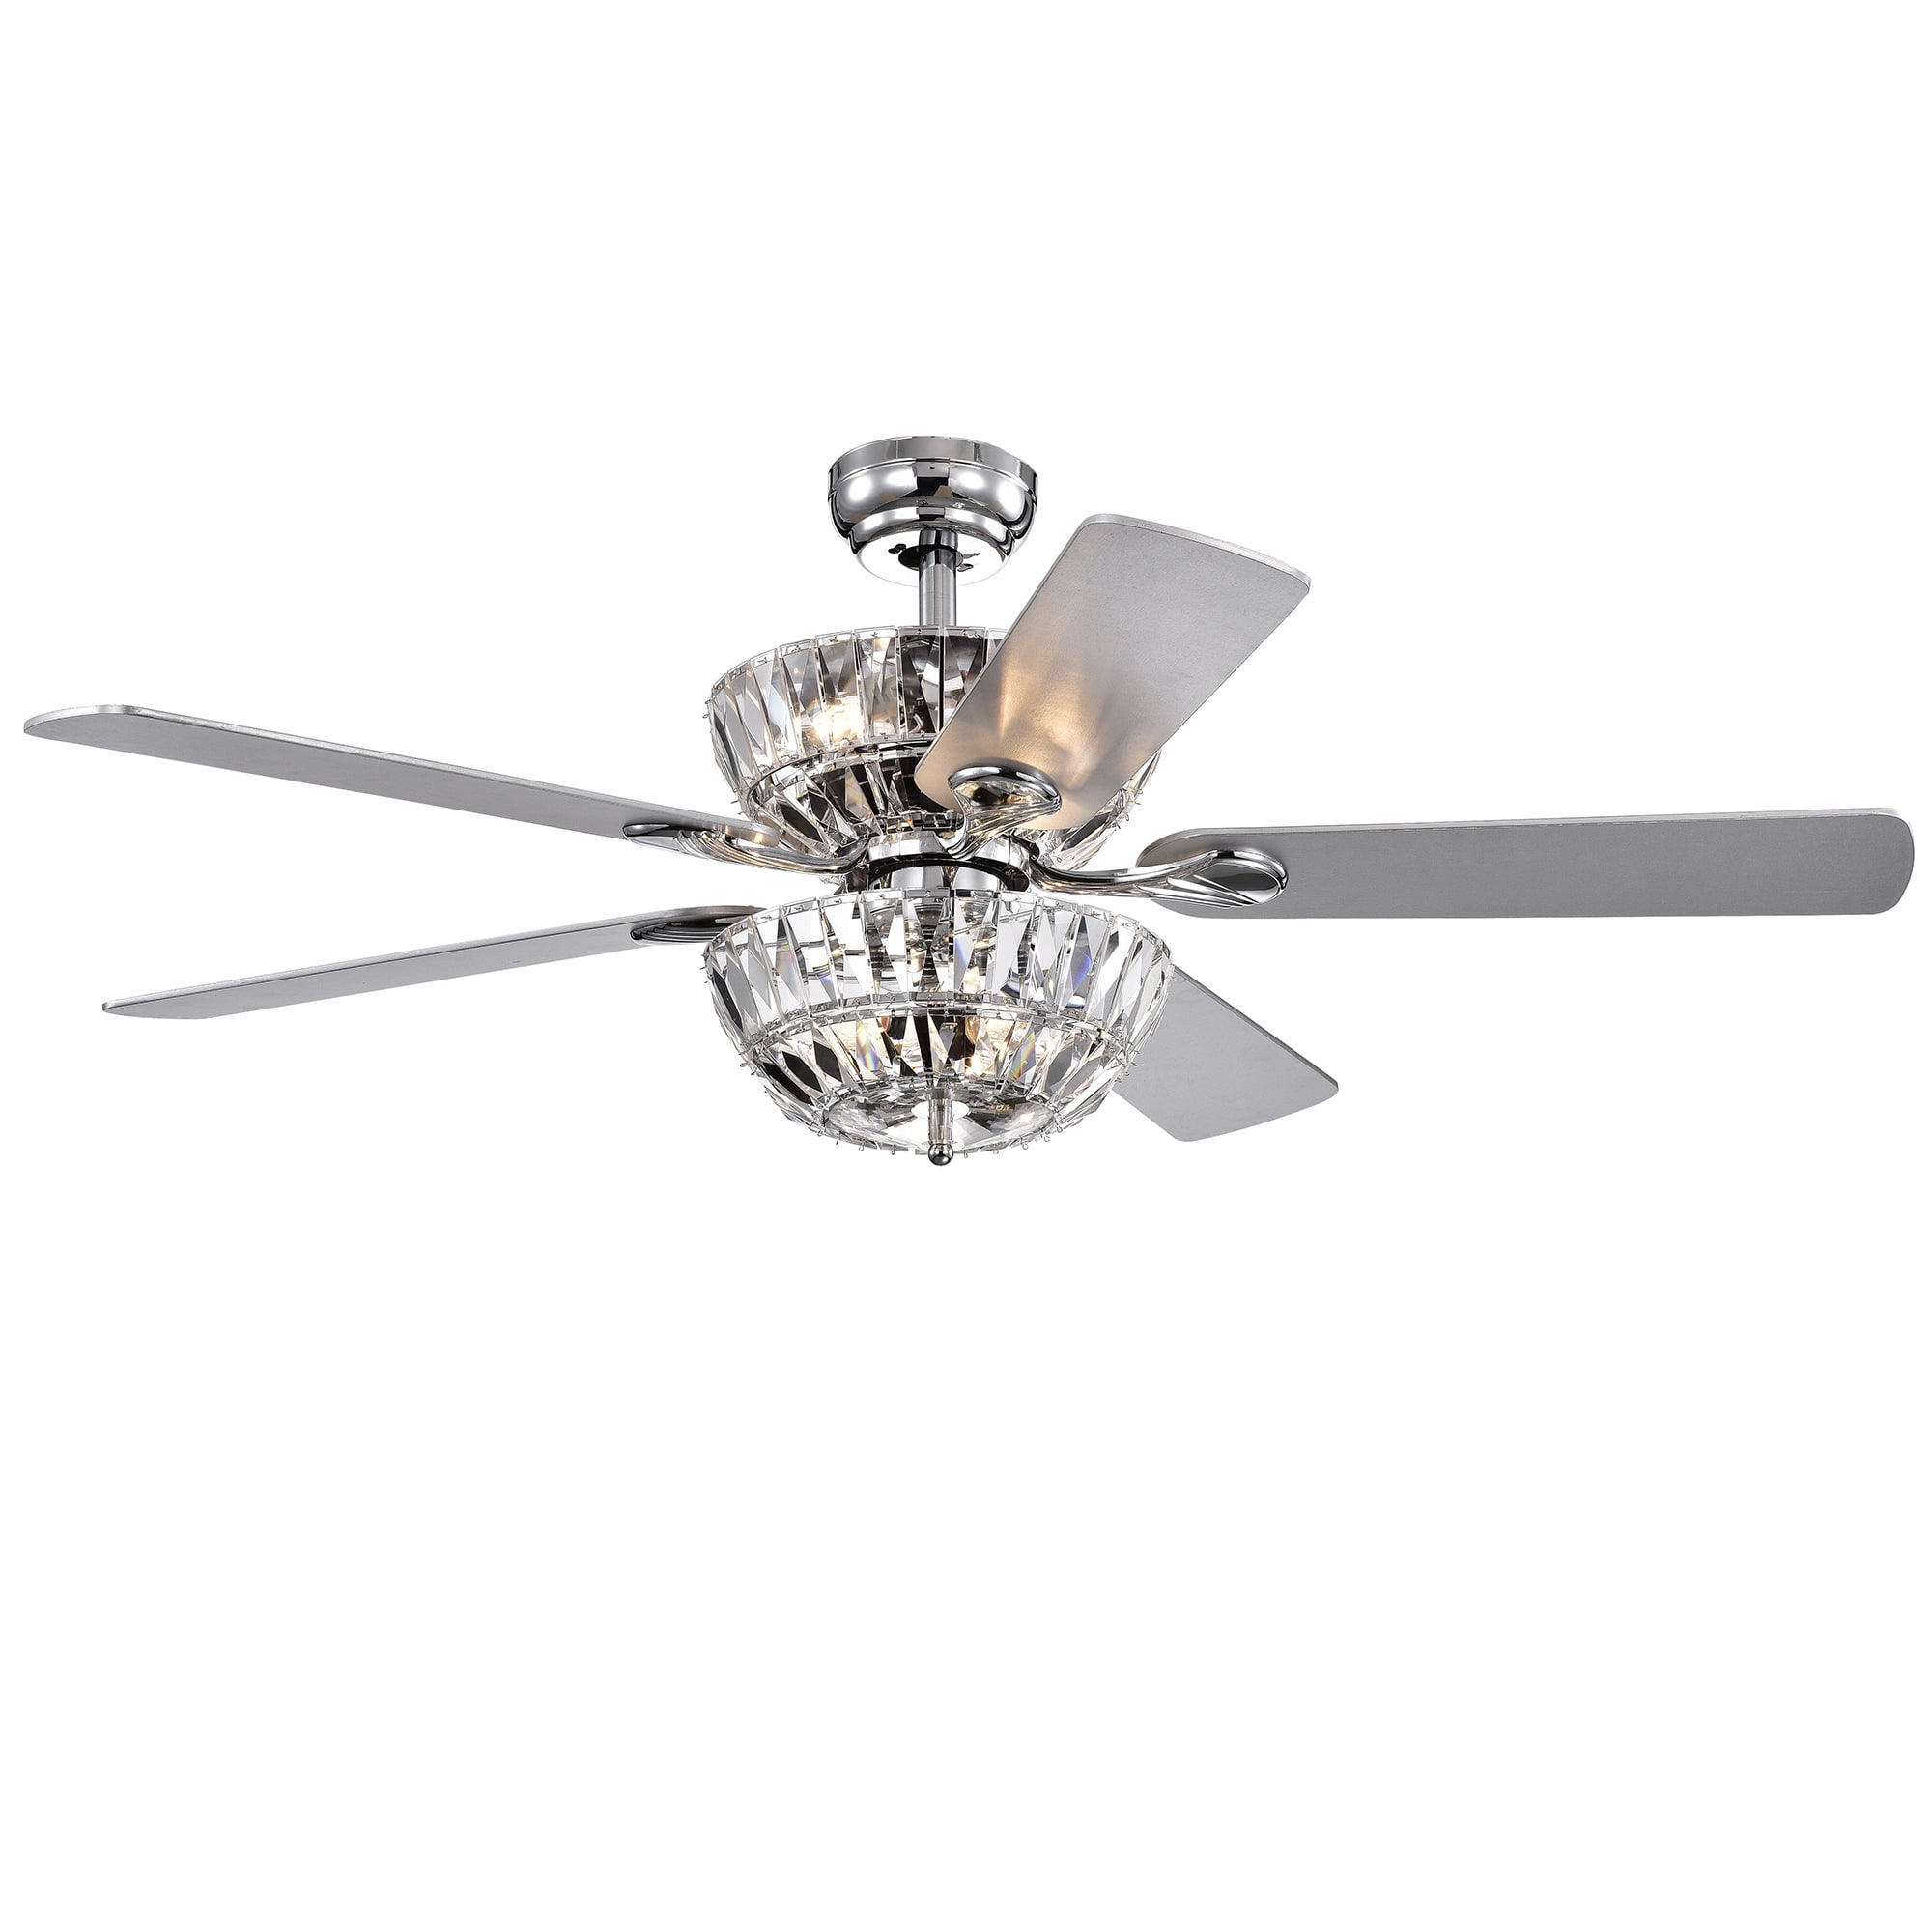 Senma Dual Lamp 52-inch 6-light Lighted Ceiling Fan with Crystal Bowl Shades (incl. Remote & 2 Color Option Blades)